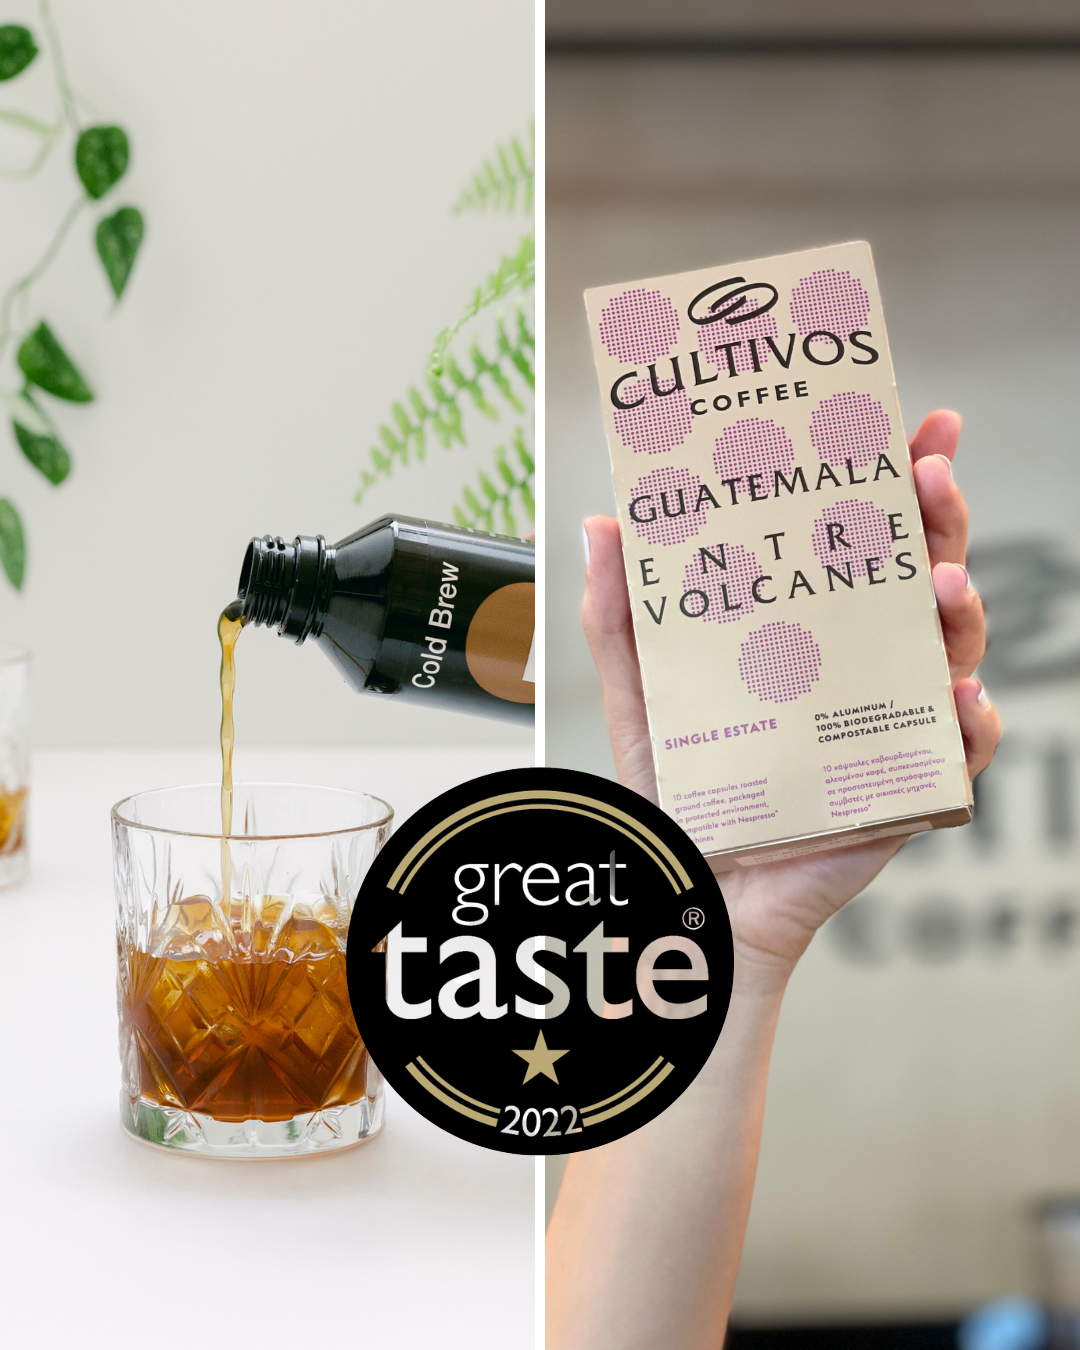 Great Taste Awards: Award for Cold Brew and Cultivos Coffee capsules